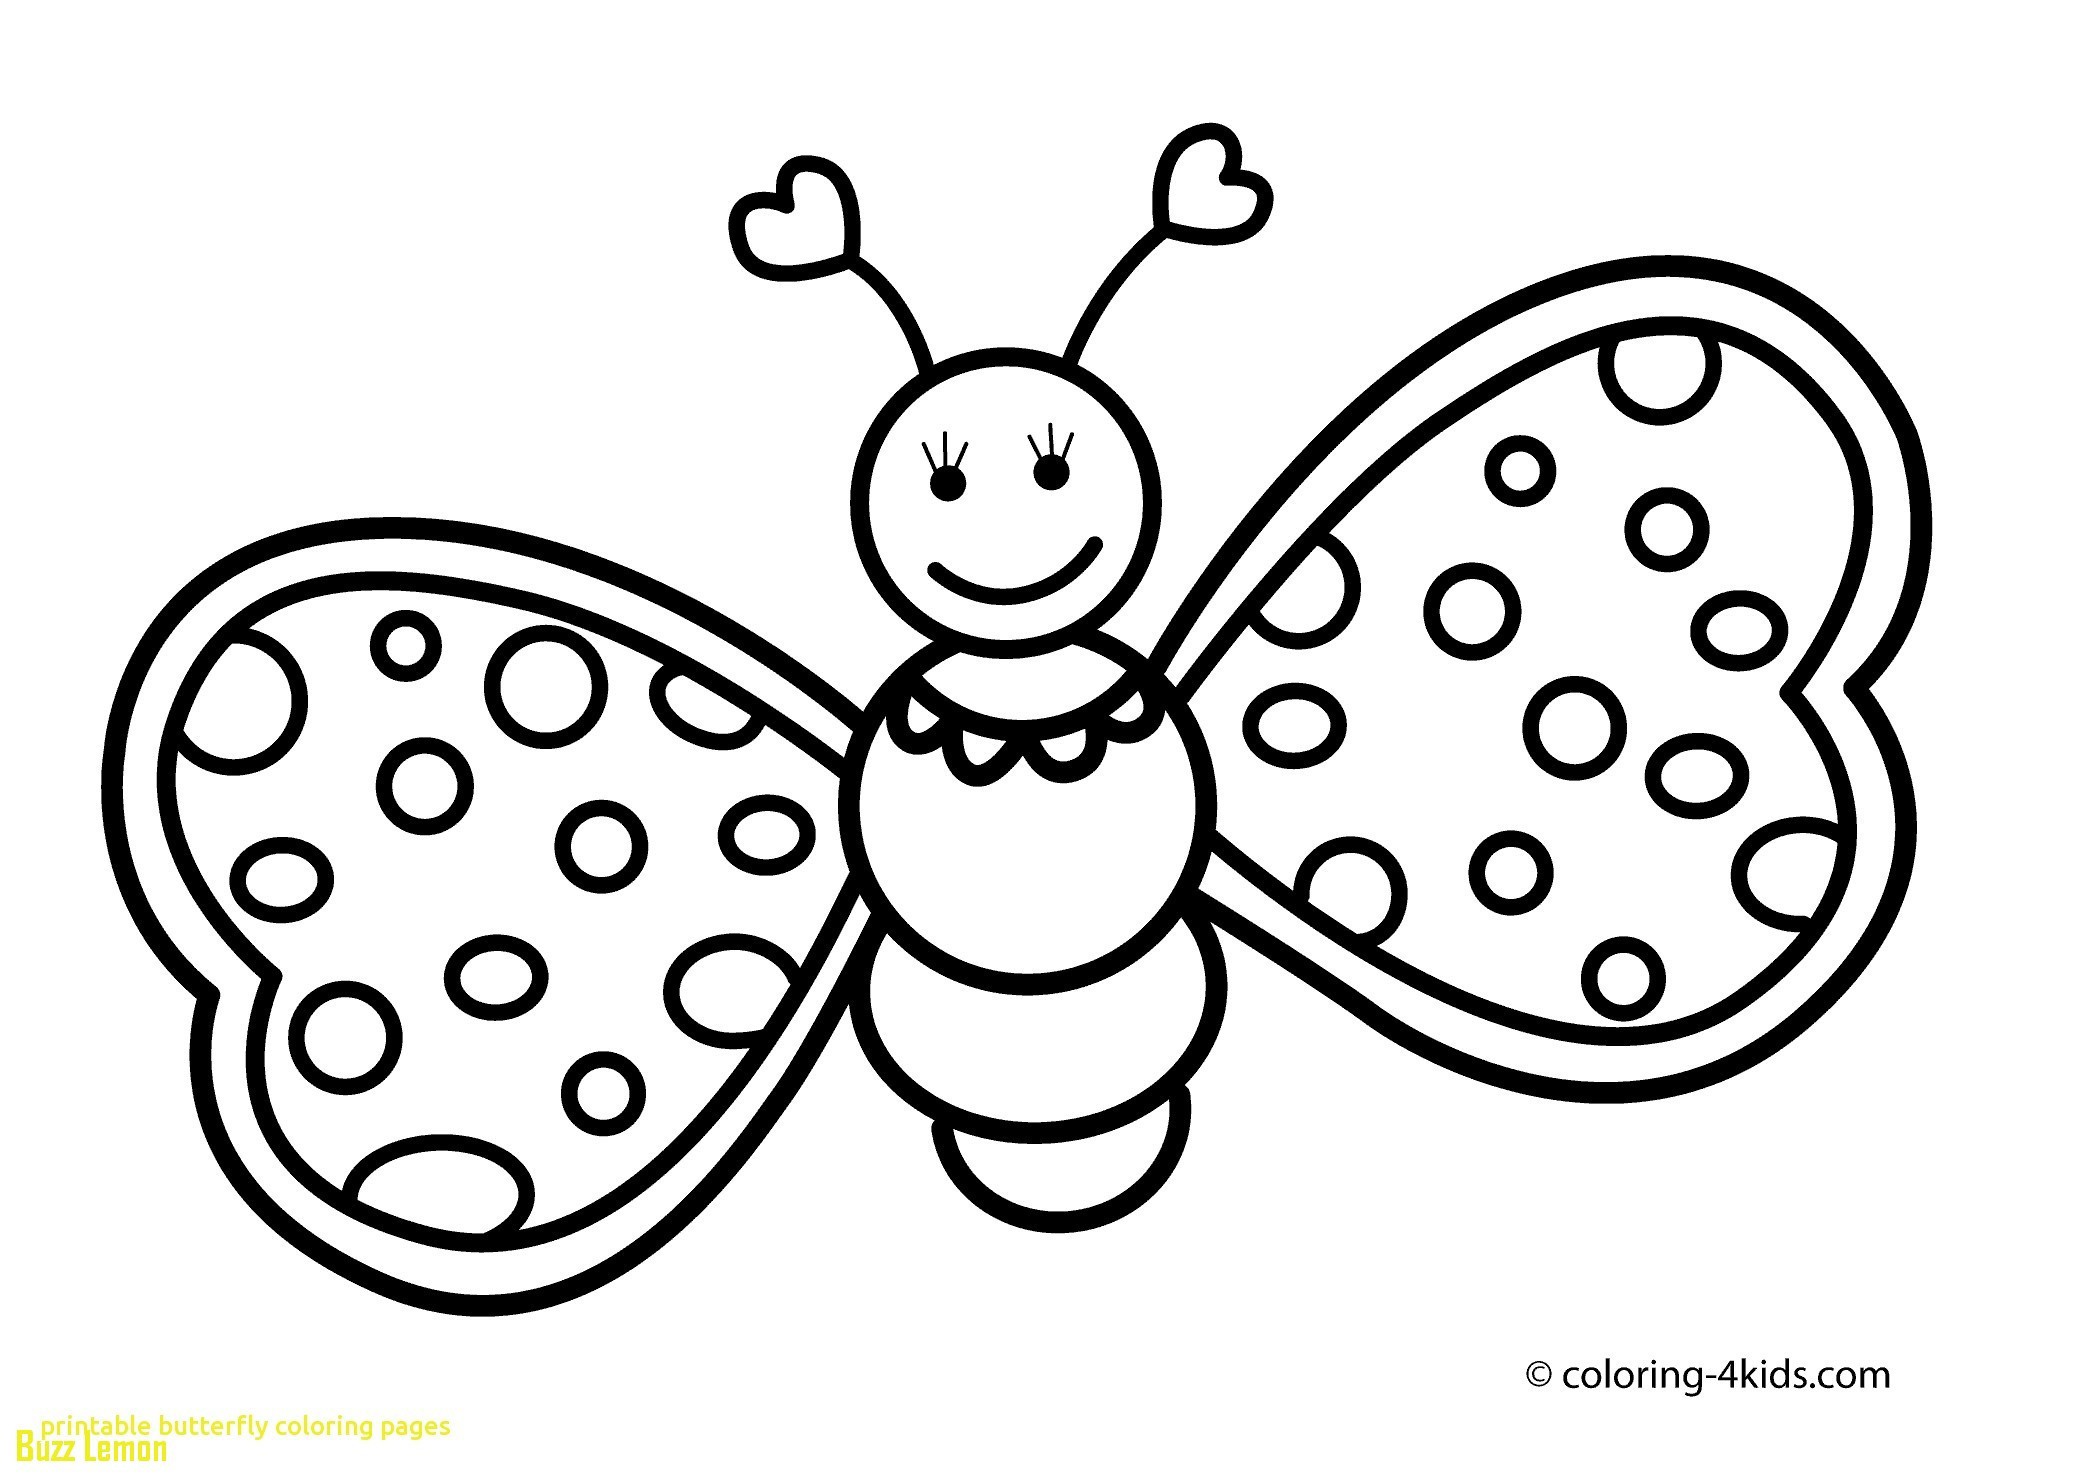 Printable butterfly Coloring Pages